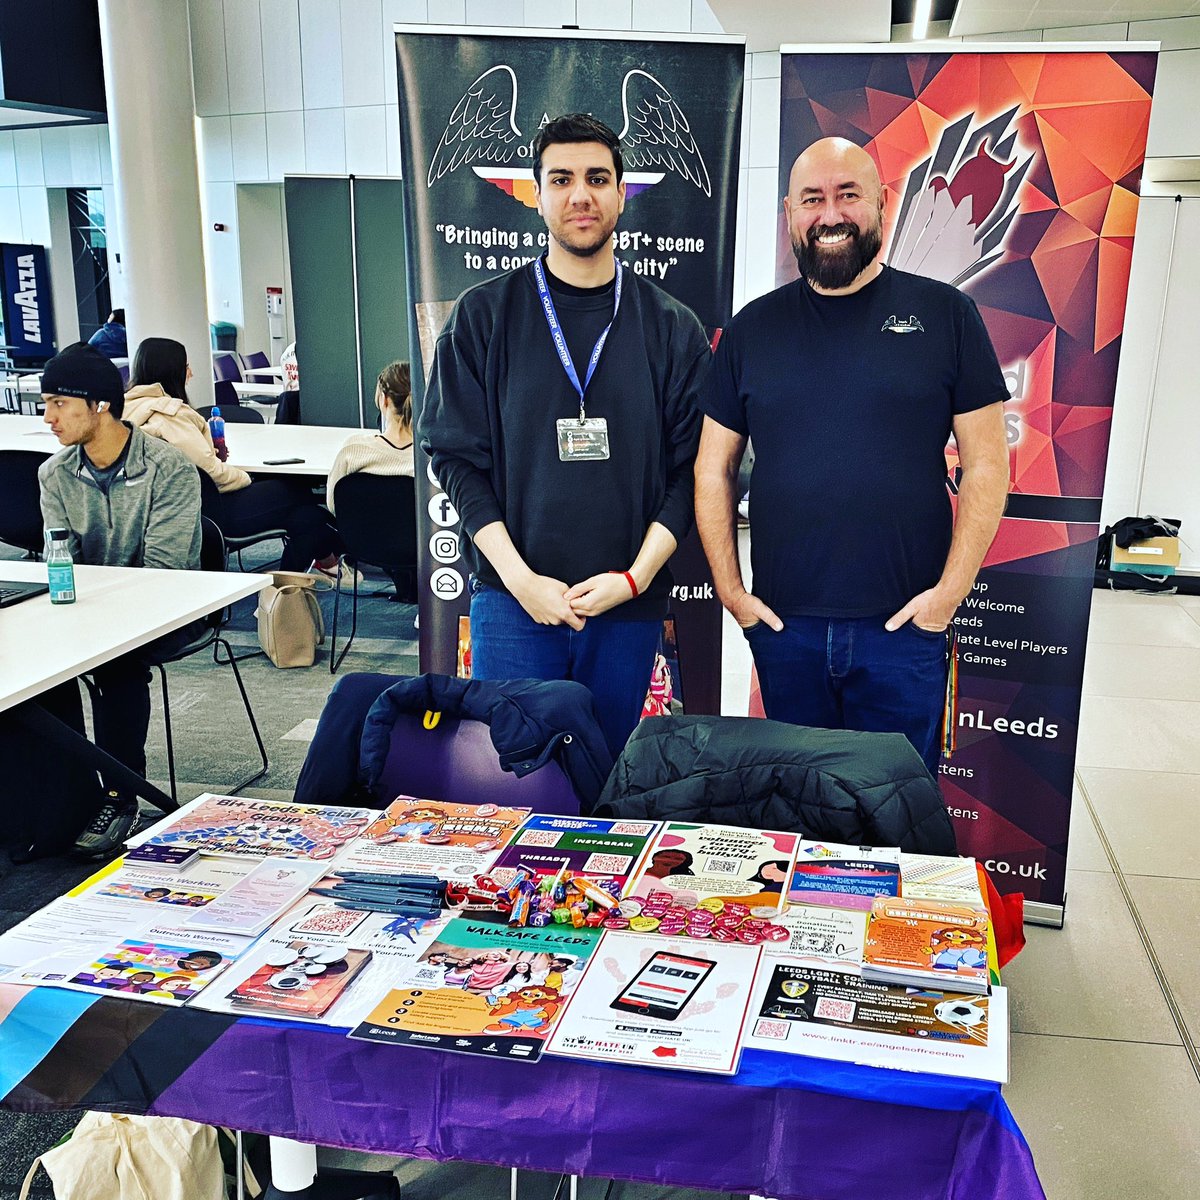 Angels Medi & Rob on the roadshow visit to the Headingley campus of Leeds Beckett University - find us in the hall by the Carnegie Cafe until 3pm to chat about all things LGBTQ+ in Leeds 🏳️‍⚧️❤️🏳️‍🌈 

#MakeFriendsInLeeds #BeSafeFeelSafe #Leeds